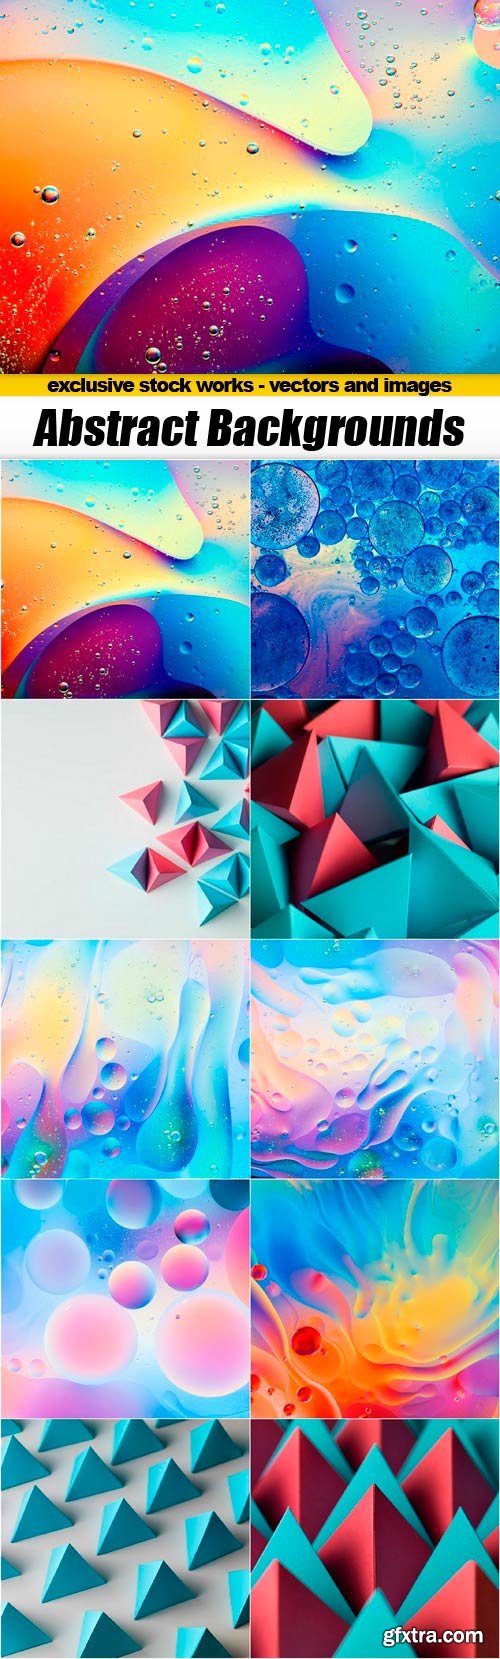 Abstract Backgrounds - 10x JPEGs